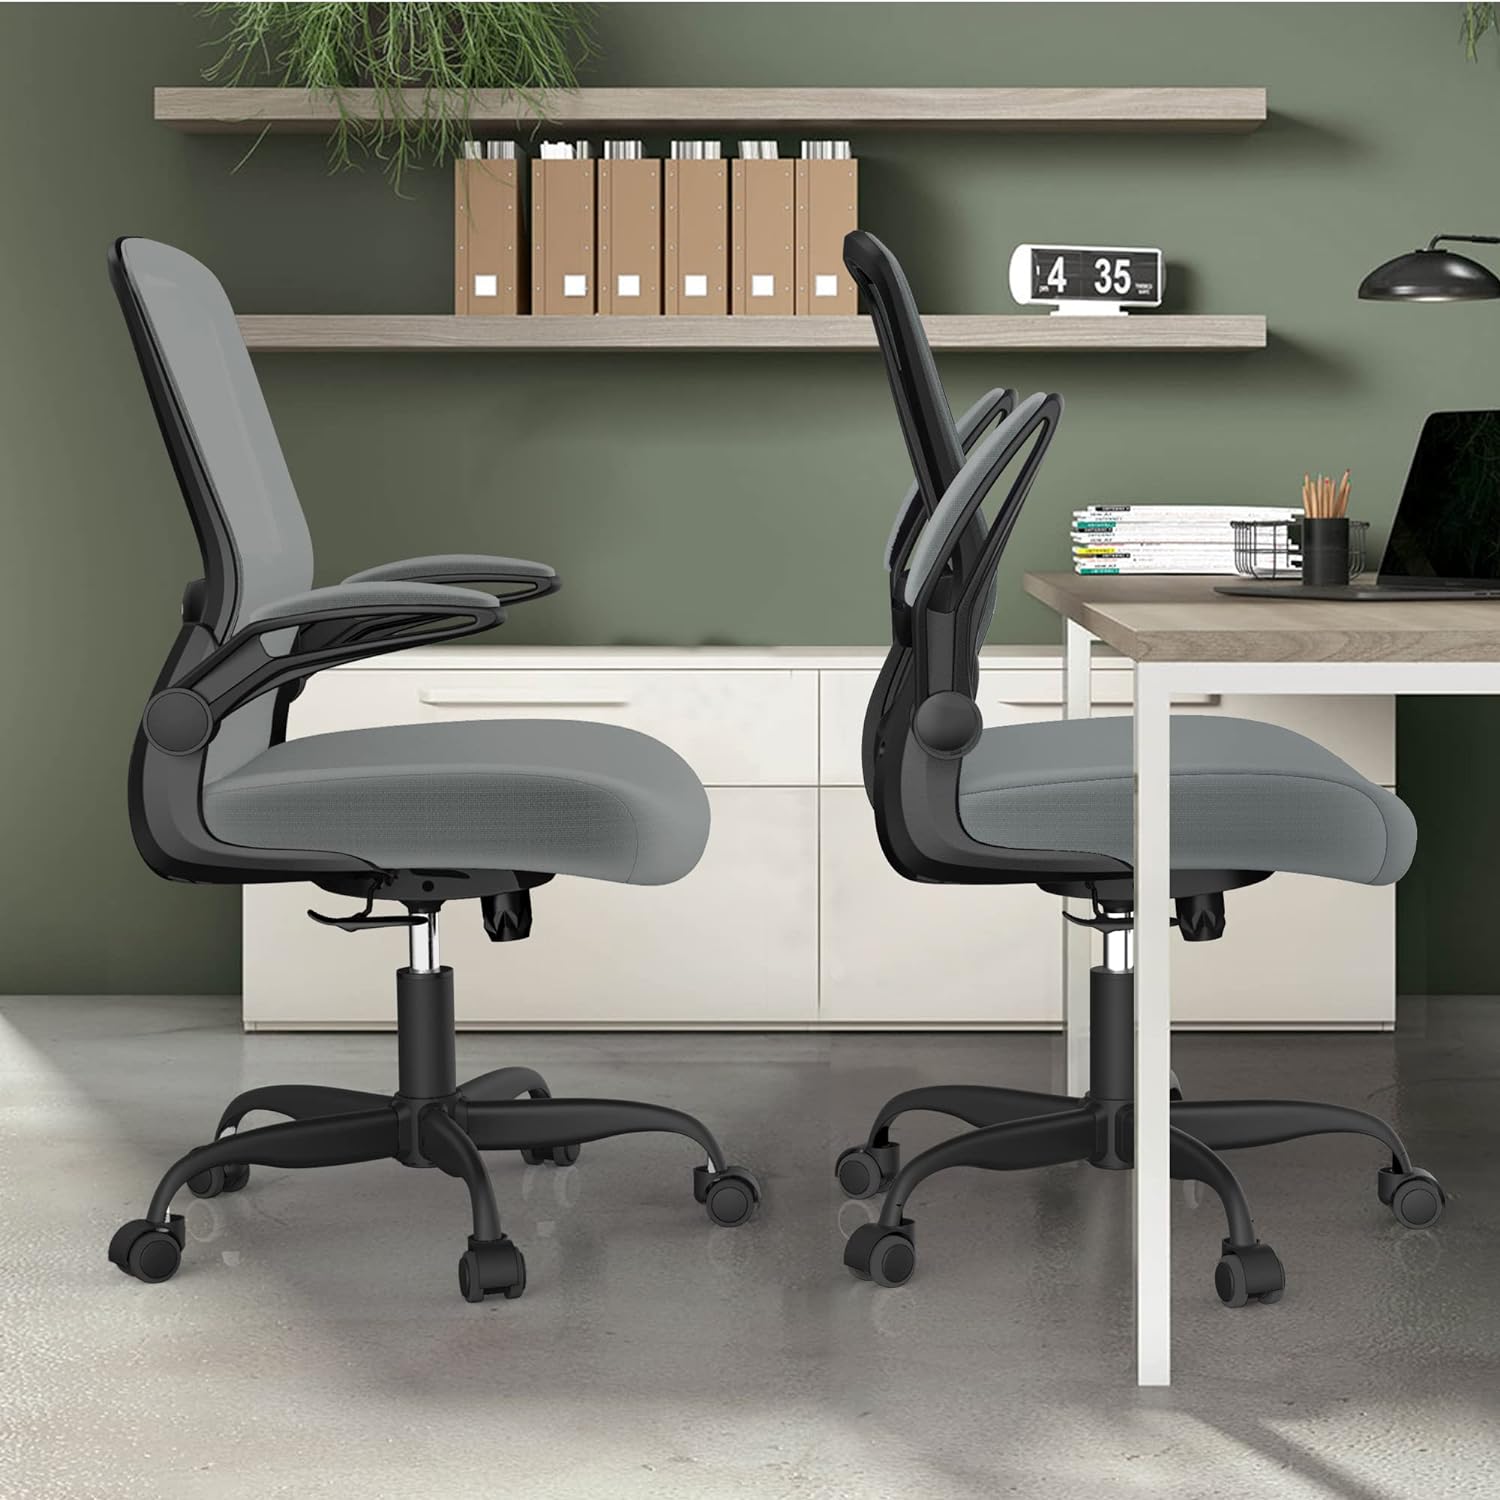 https://bigbigmart.com/wp-content/uploads/2023/12/Mimoglad-Office-Chair-Ergonomic-Desk-Chair-with-Adjustable-Lumbar-Support-High-Back-Mesh-Computer-Chair-with-Flip-up-Armrests-BIFMA-Passed-Task-Chairs-Executive-Chair-for-Home-Office-Graphite7.jpg